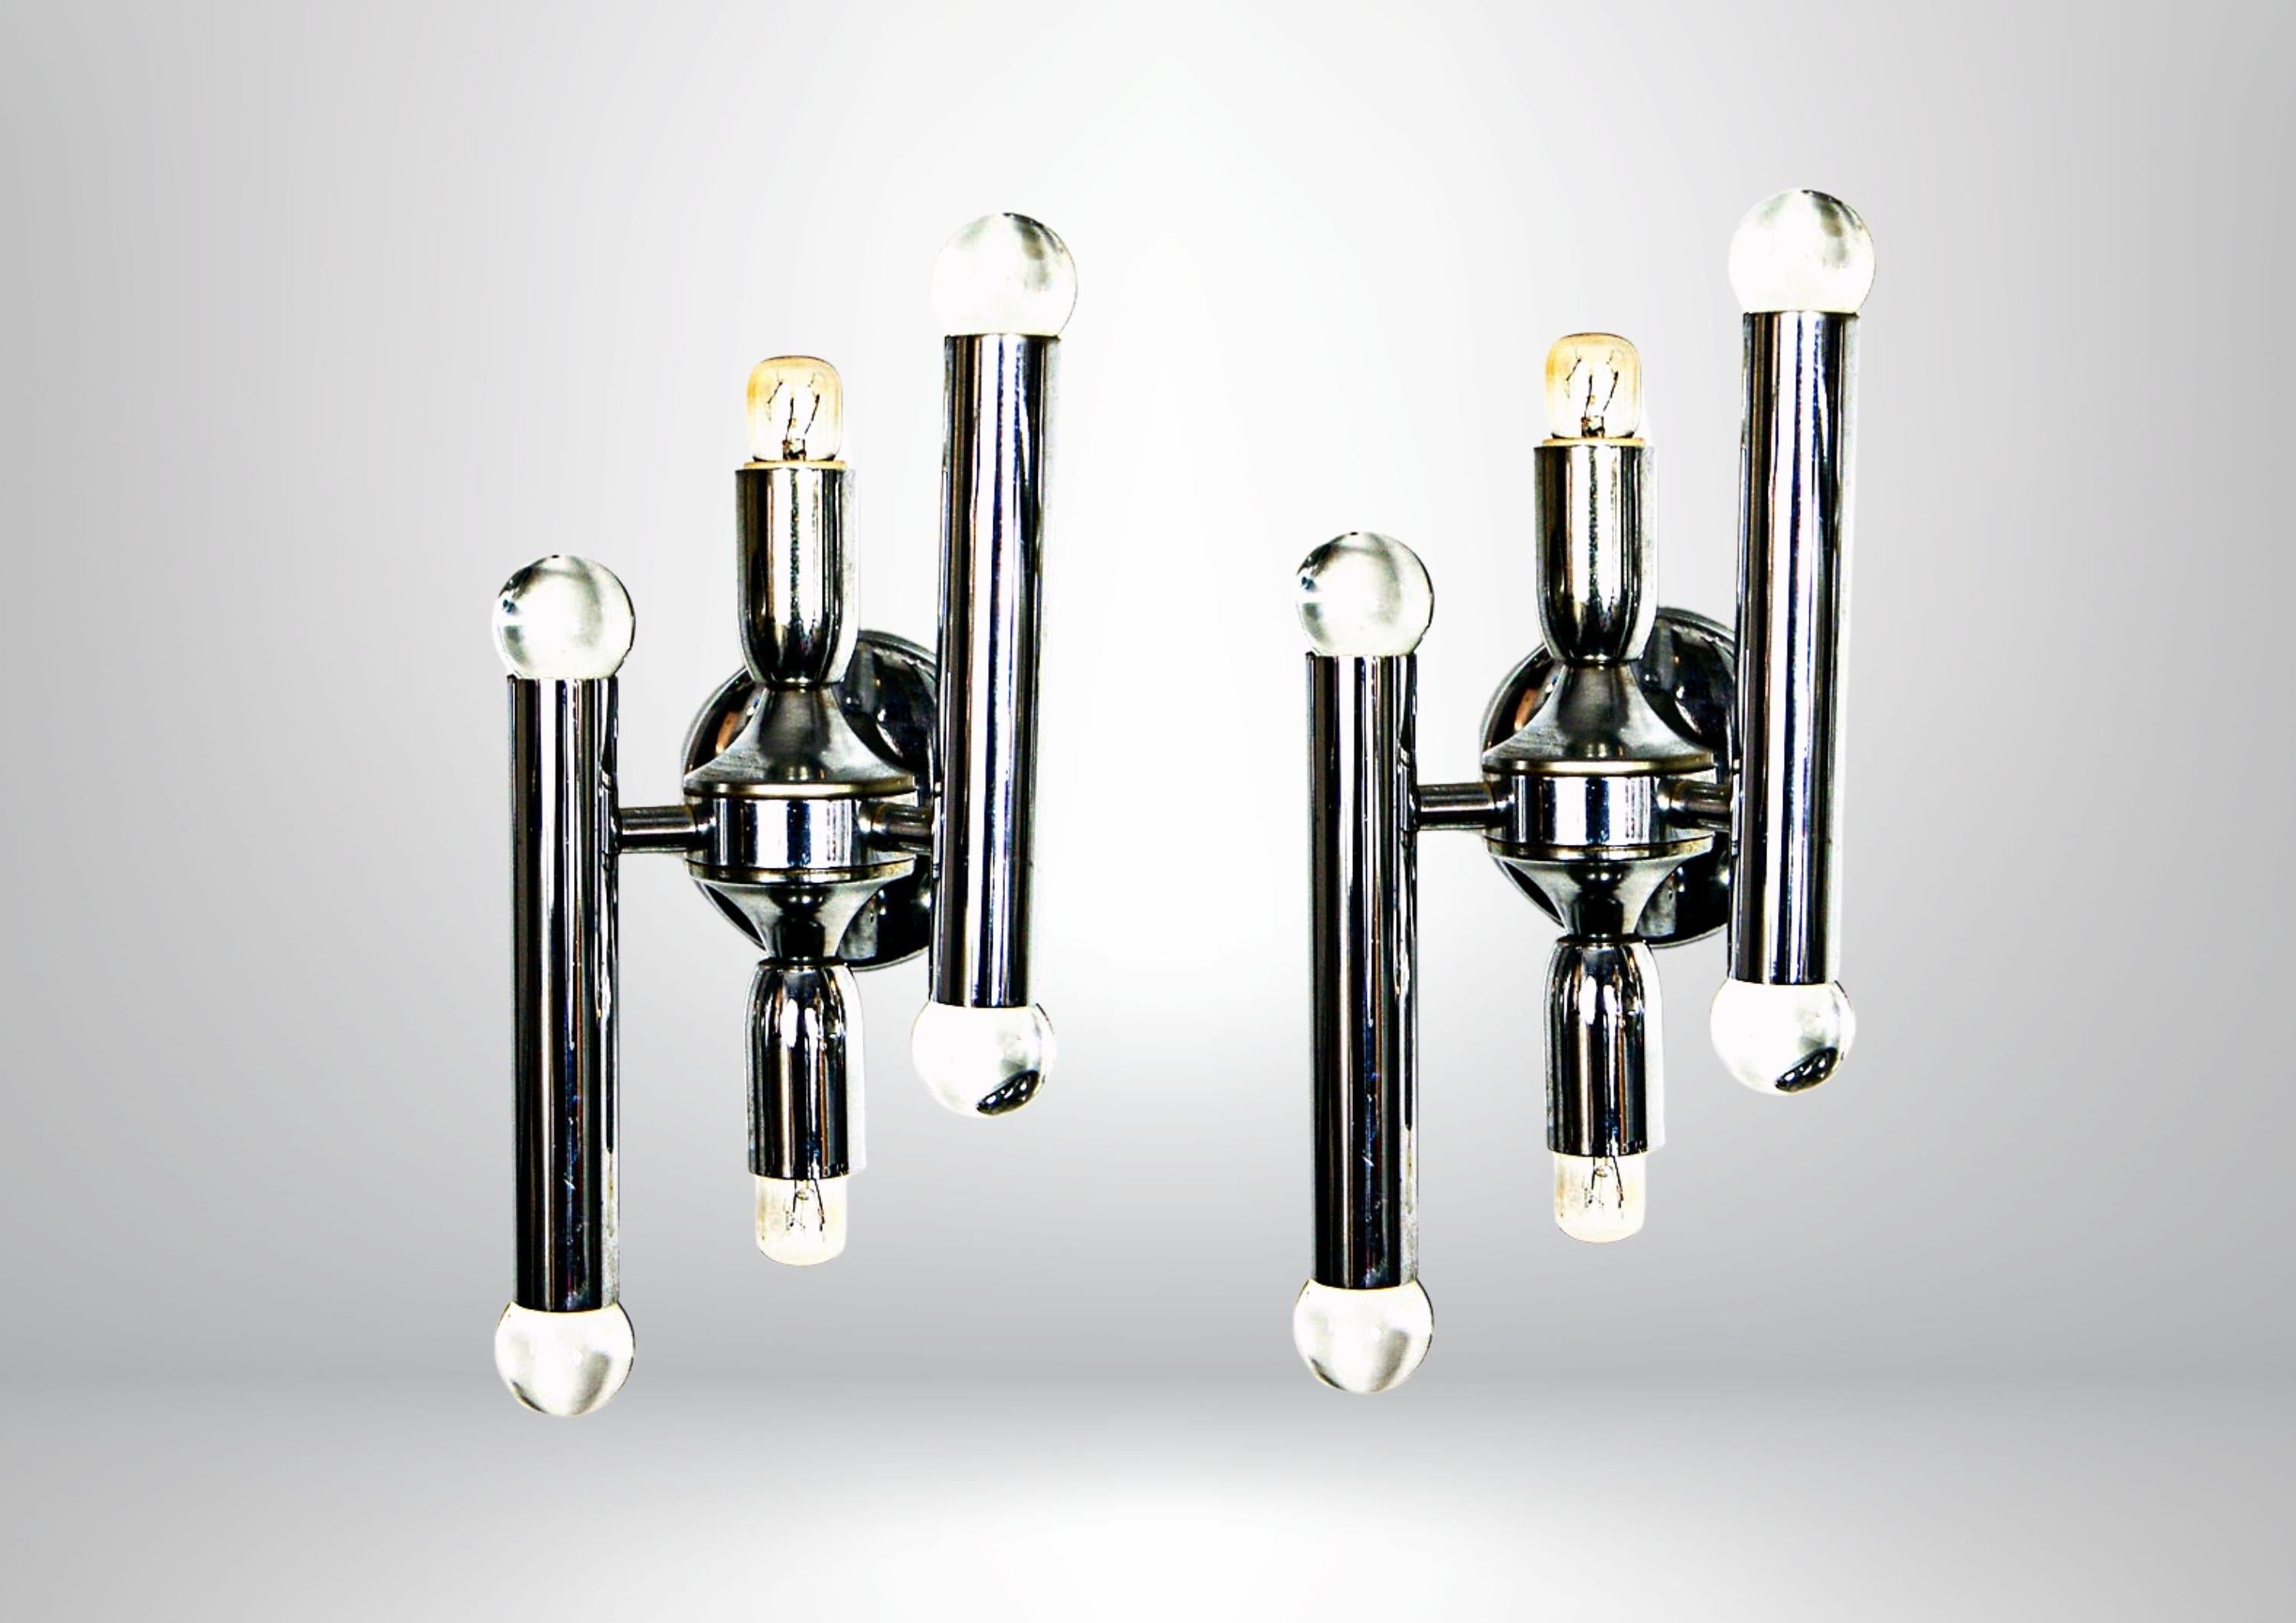 Pair of glass crystal and chromed steel wall sconces by Gaetano Sciolari.
Made in Italy in the 1960s.
Featuring 3 tubular chromed steel structured pipes set on a domed wall mounting unit, also in chromed steel.
Each tubular steel is finished with